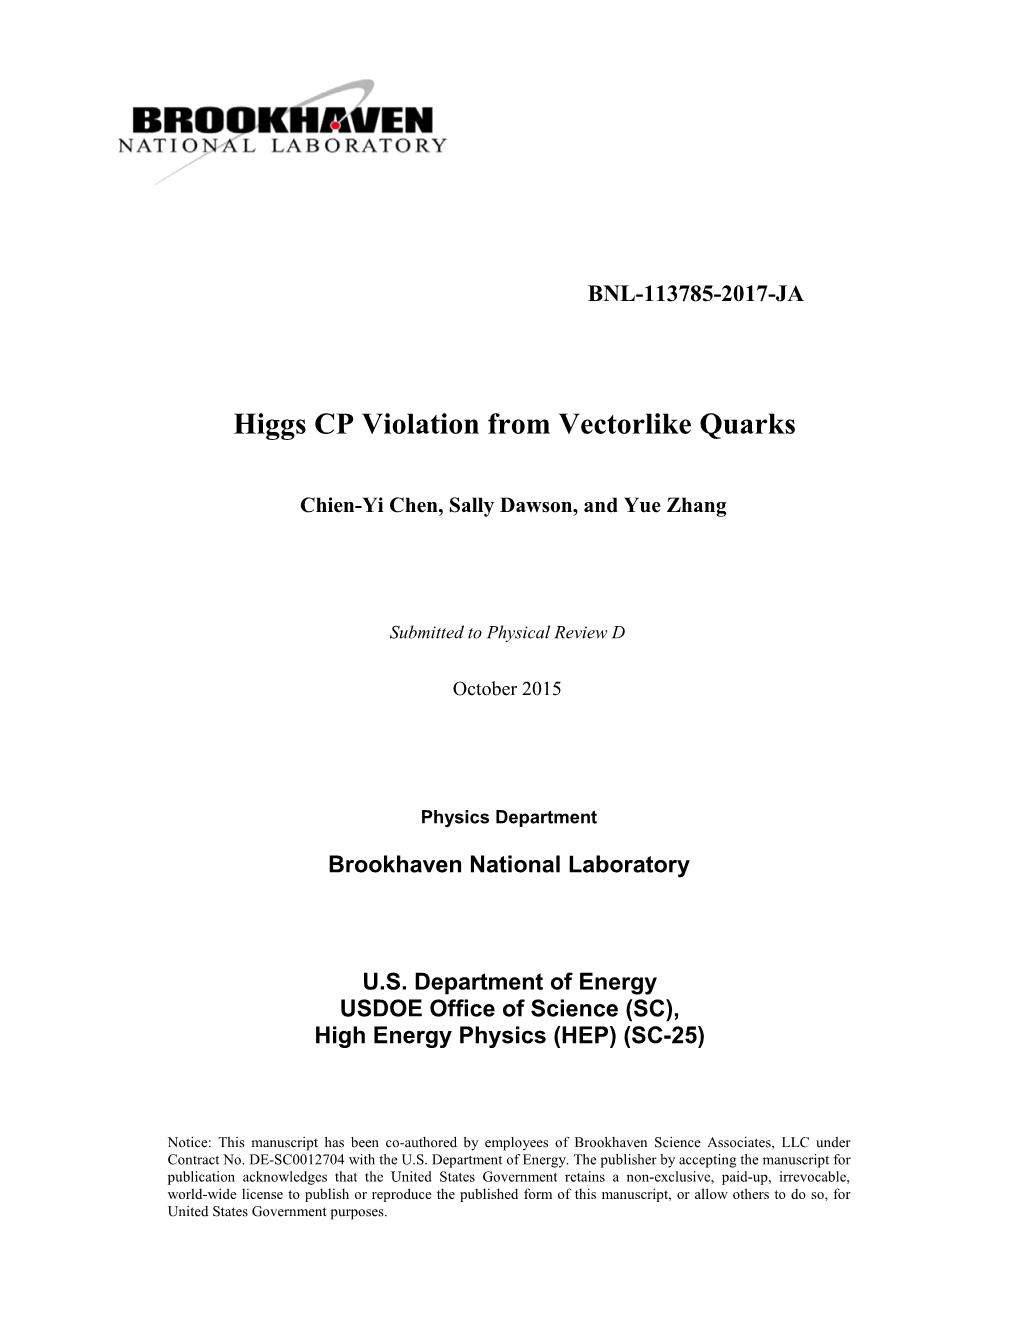 Higgs CP Violation from Vectorlike Quarks